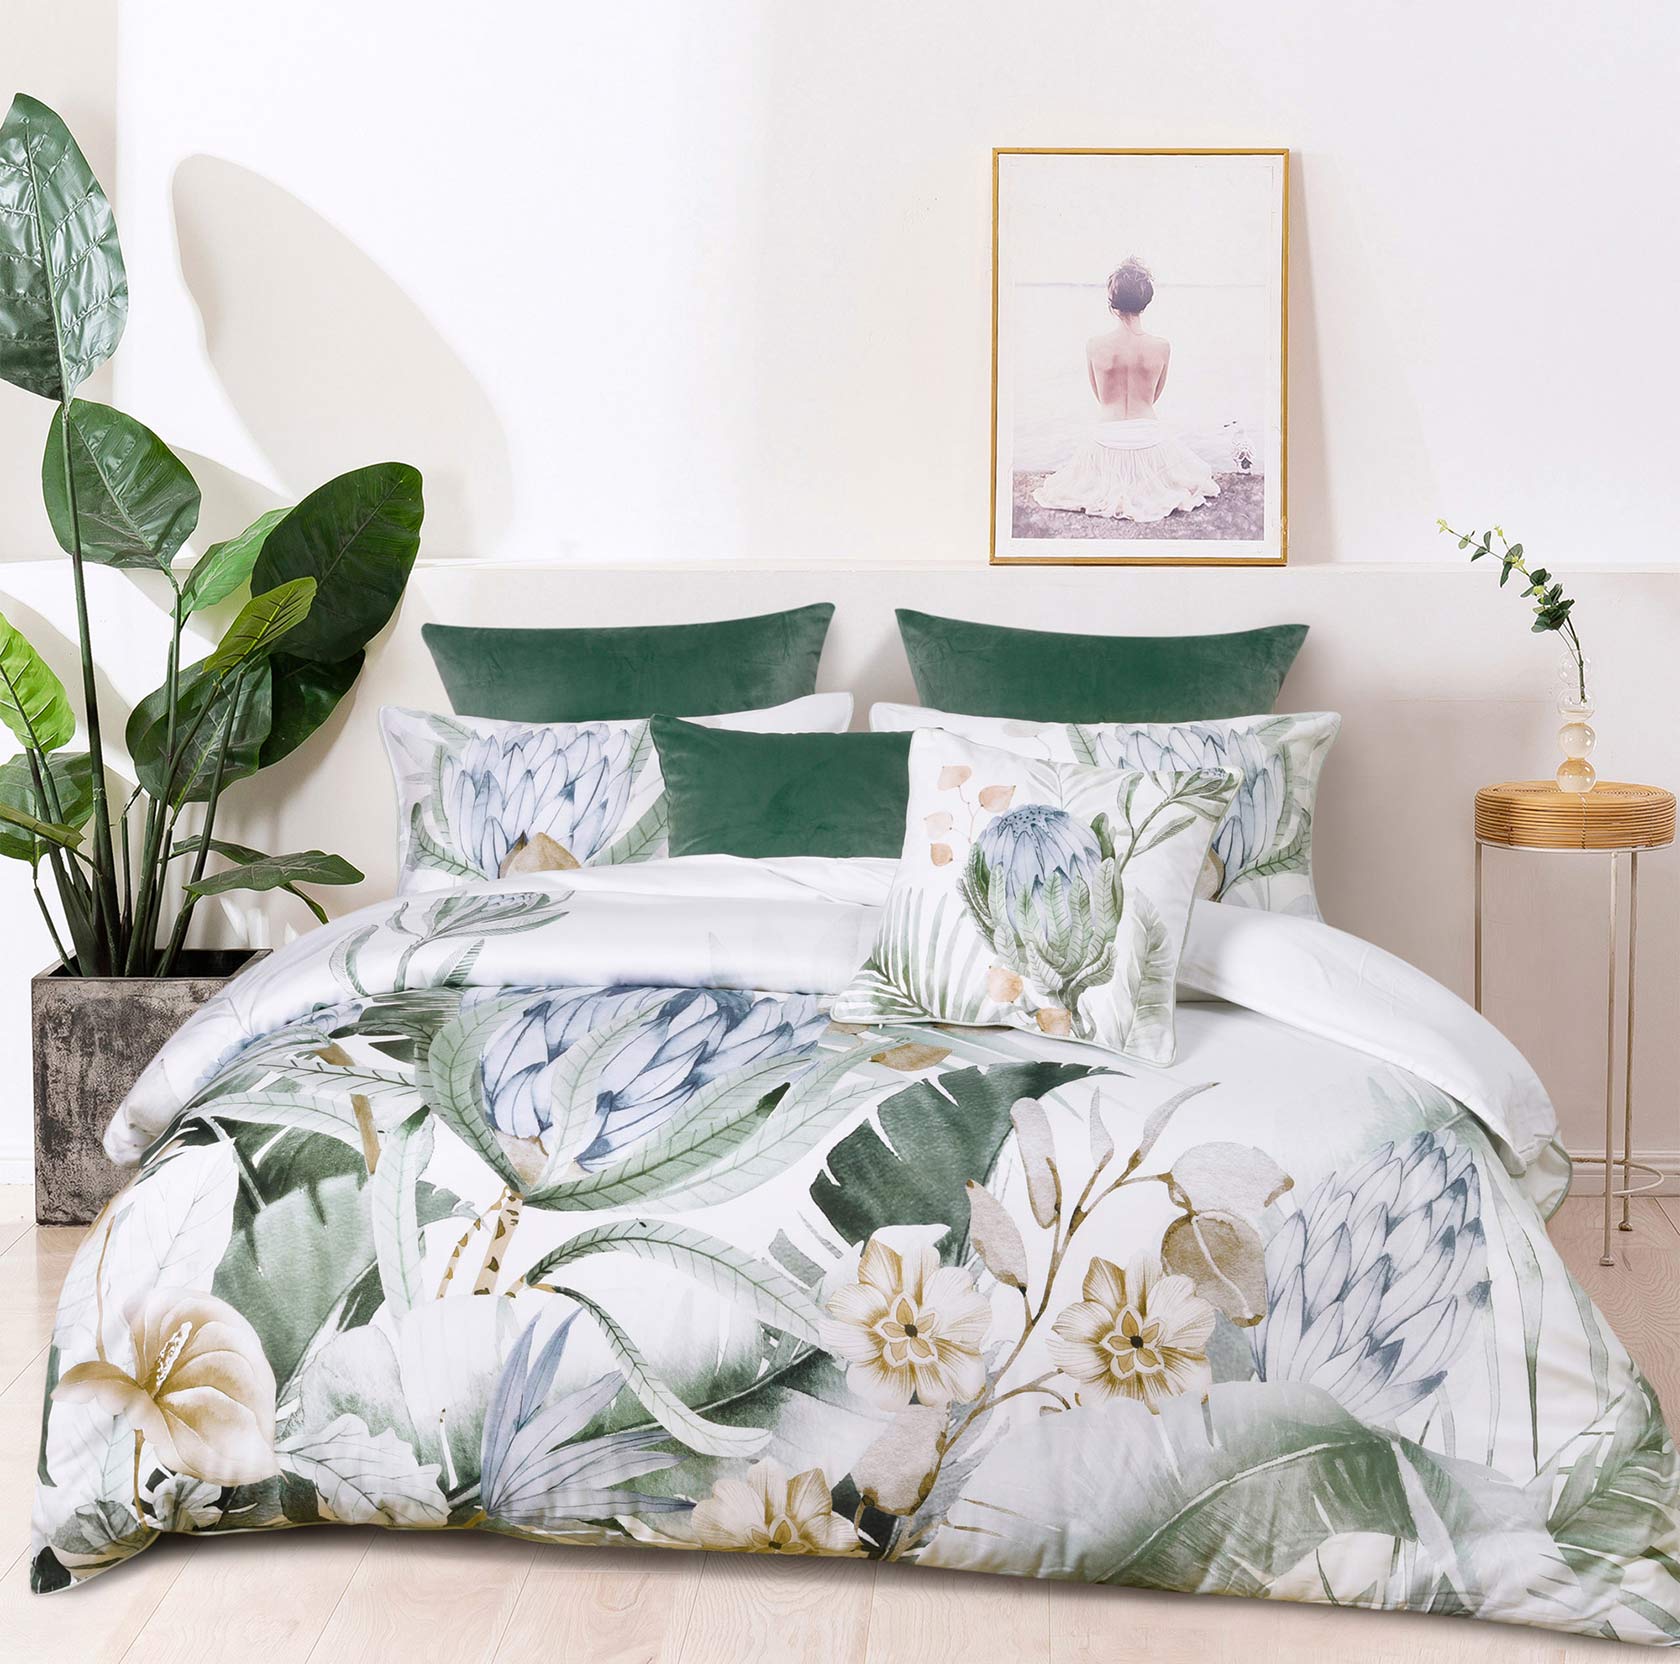 Make a change this spring and bring some freshness with Evergreen. Gorgeous florals in cool tones are perfectly placed over this quilt cover.